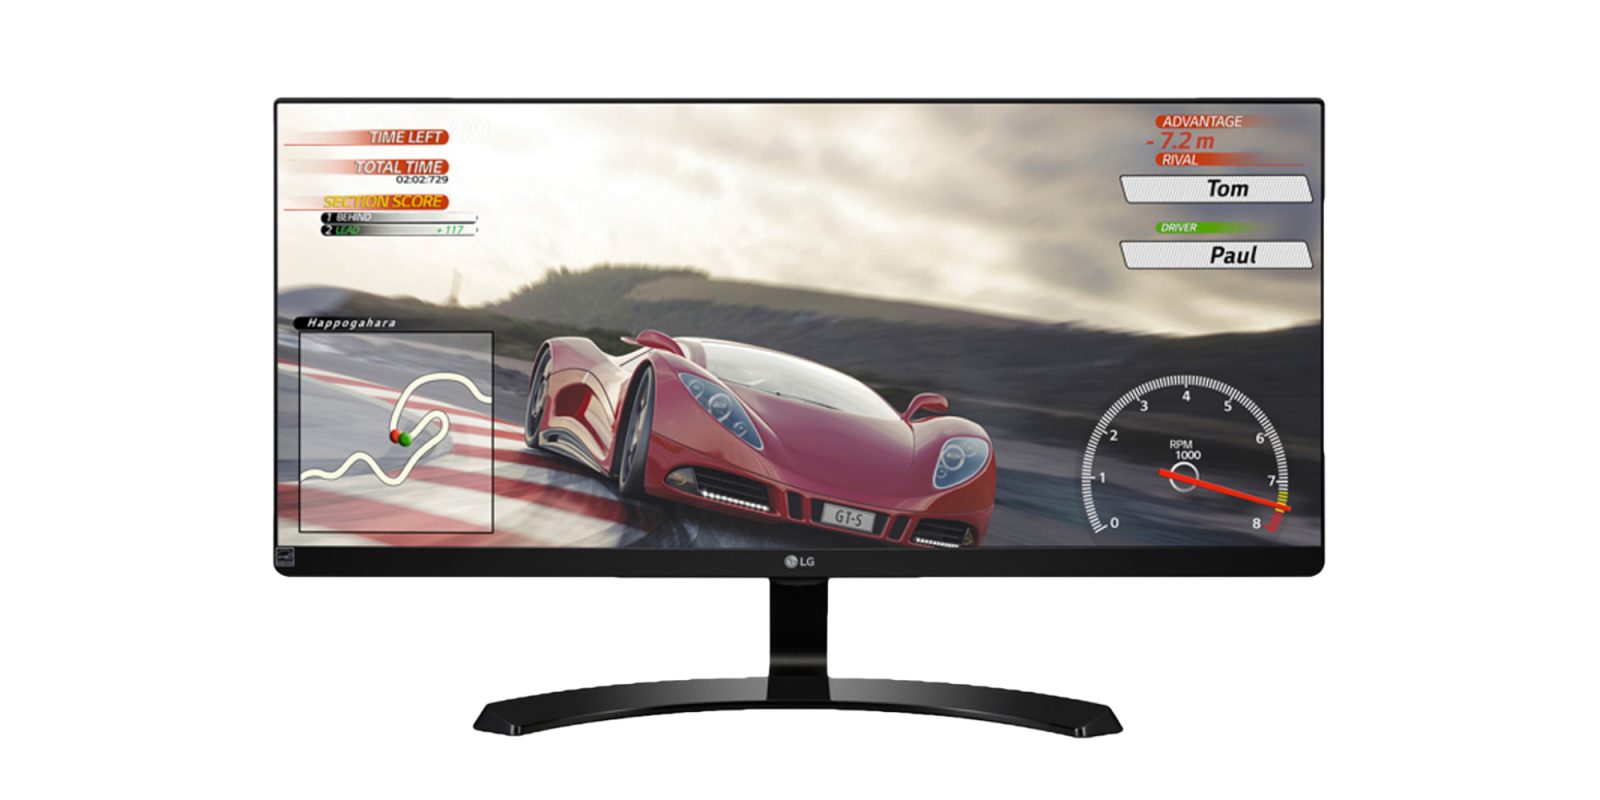 LG 29-inch UltraWide Monitor w/ HDMI input upgrades your desk setup for